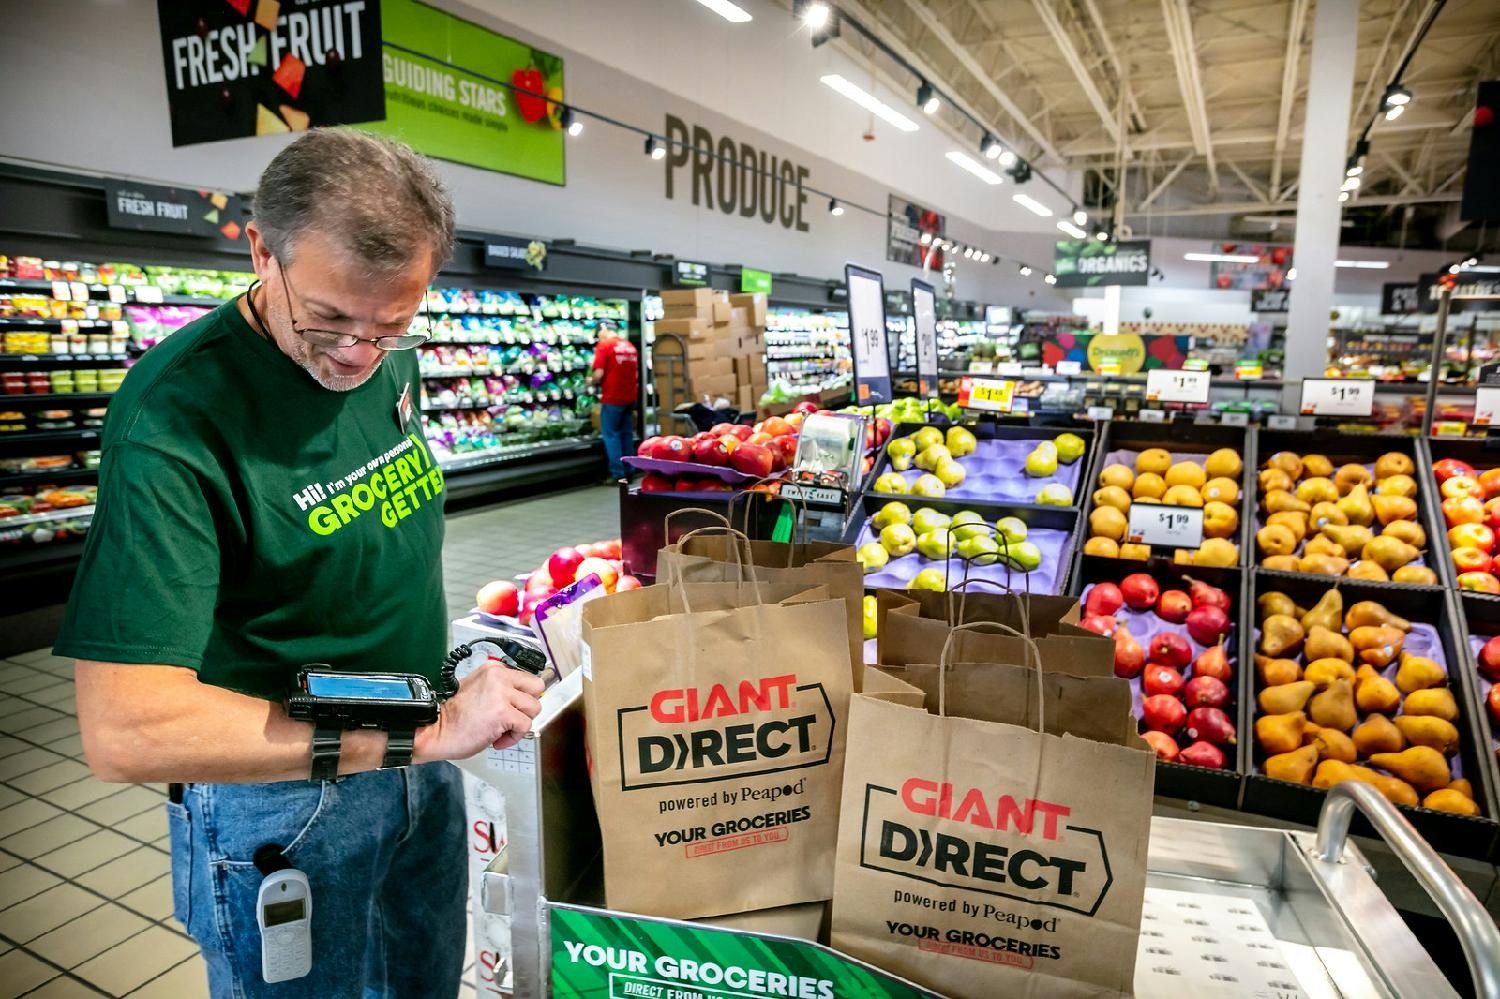 A GIANT Direct shopper reviews an order on his scanner, preparing it for Giant Direct pickup or delivery. 